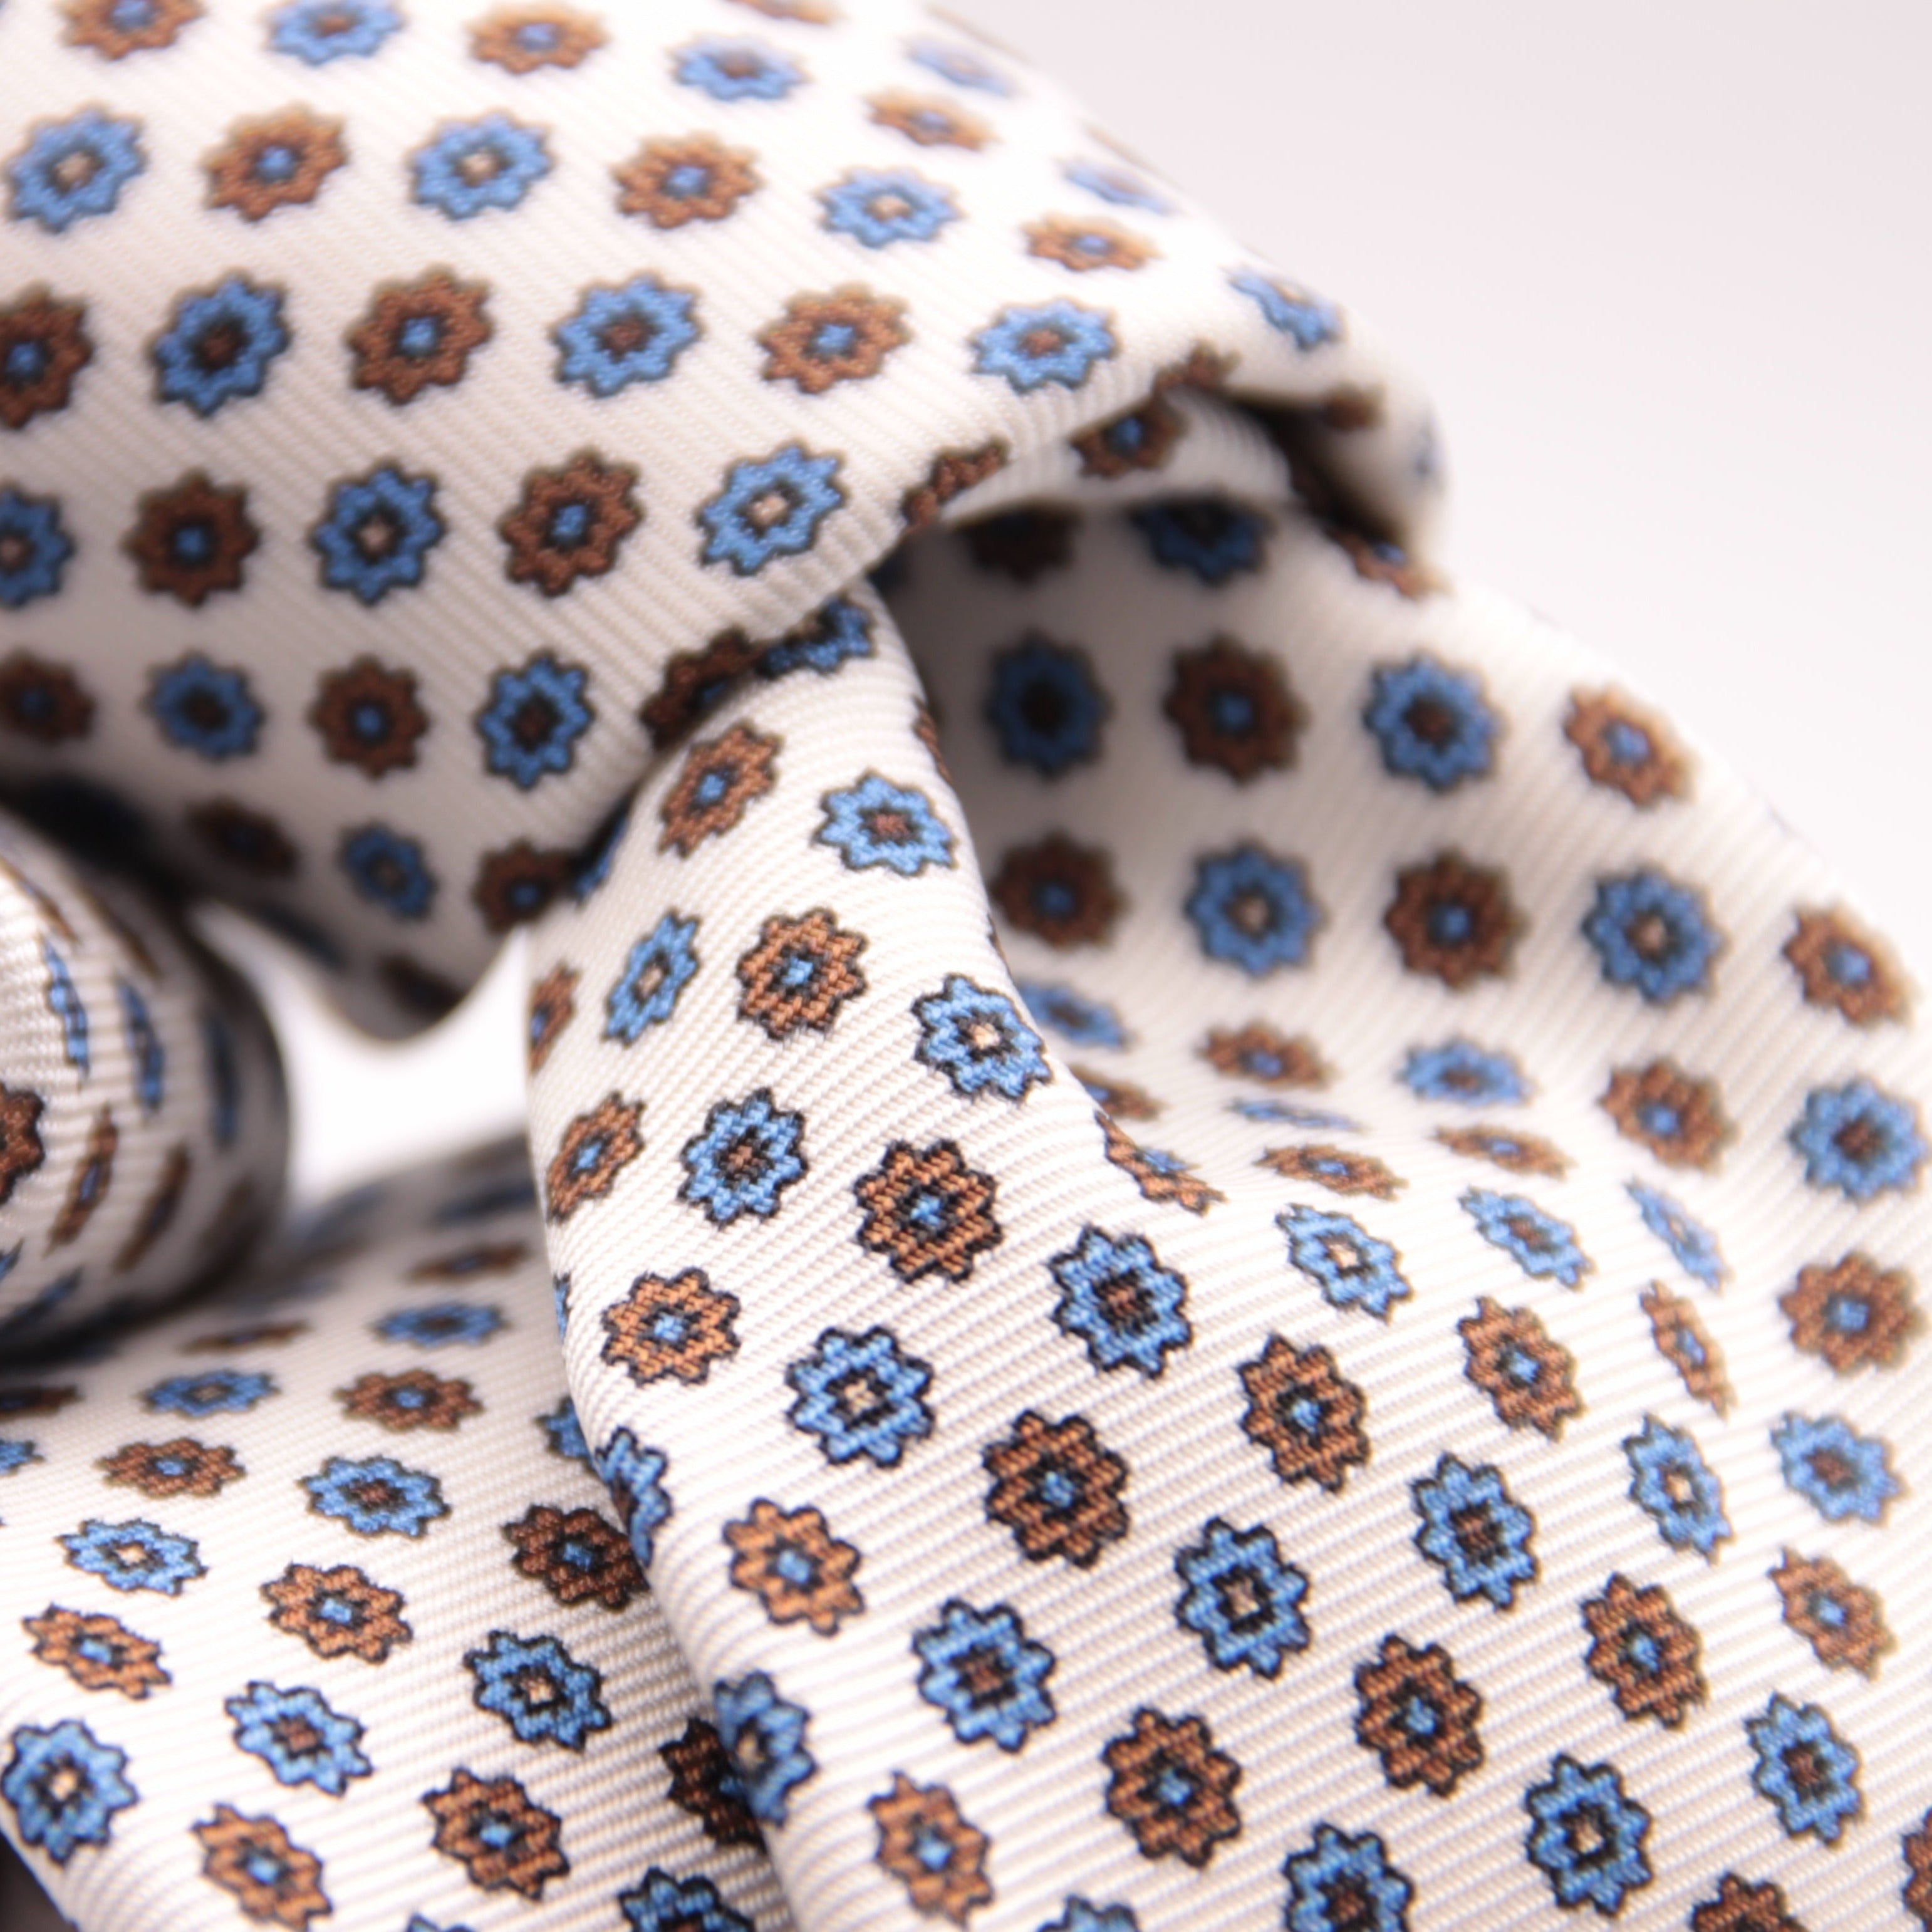 Holliday & Brown for Cruciani & Bella 100% printed Silk Self tipped White, Light Blue and Brown motif tie Handmade in Italy 8 cm x 150 cm #6328